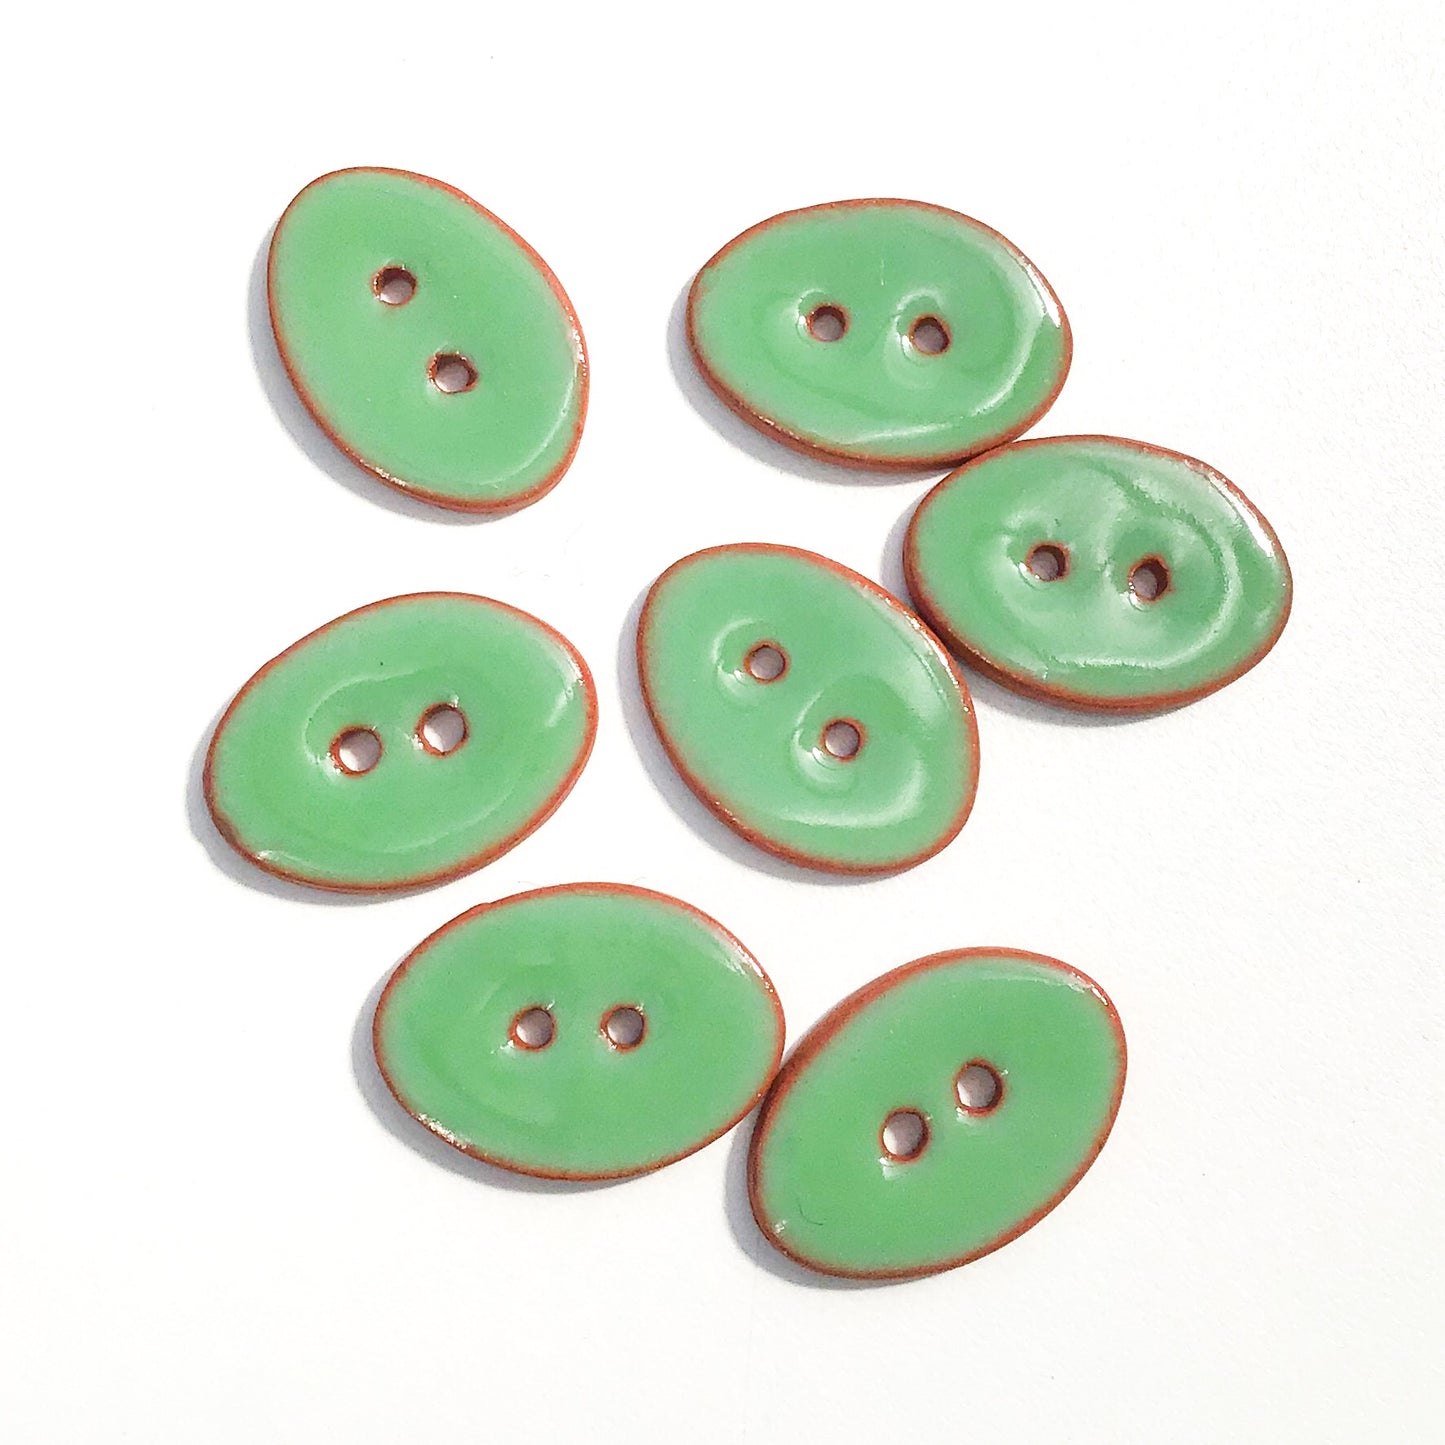 Grassy Green Oval Clay Buttons - 5/8" x 7/8" - 7 Pack (ws-93)